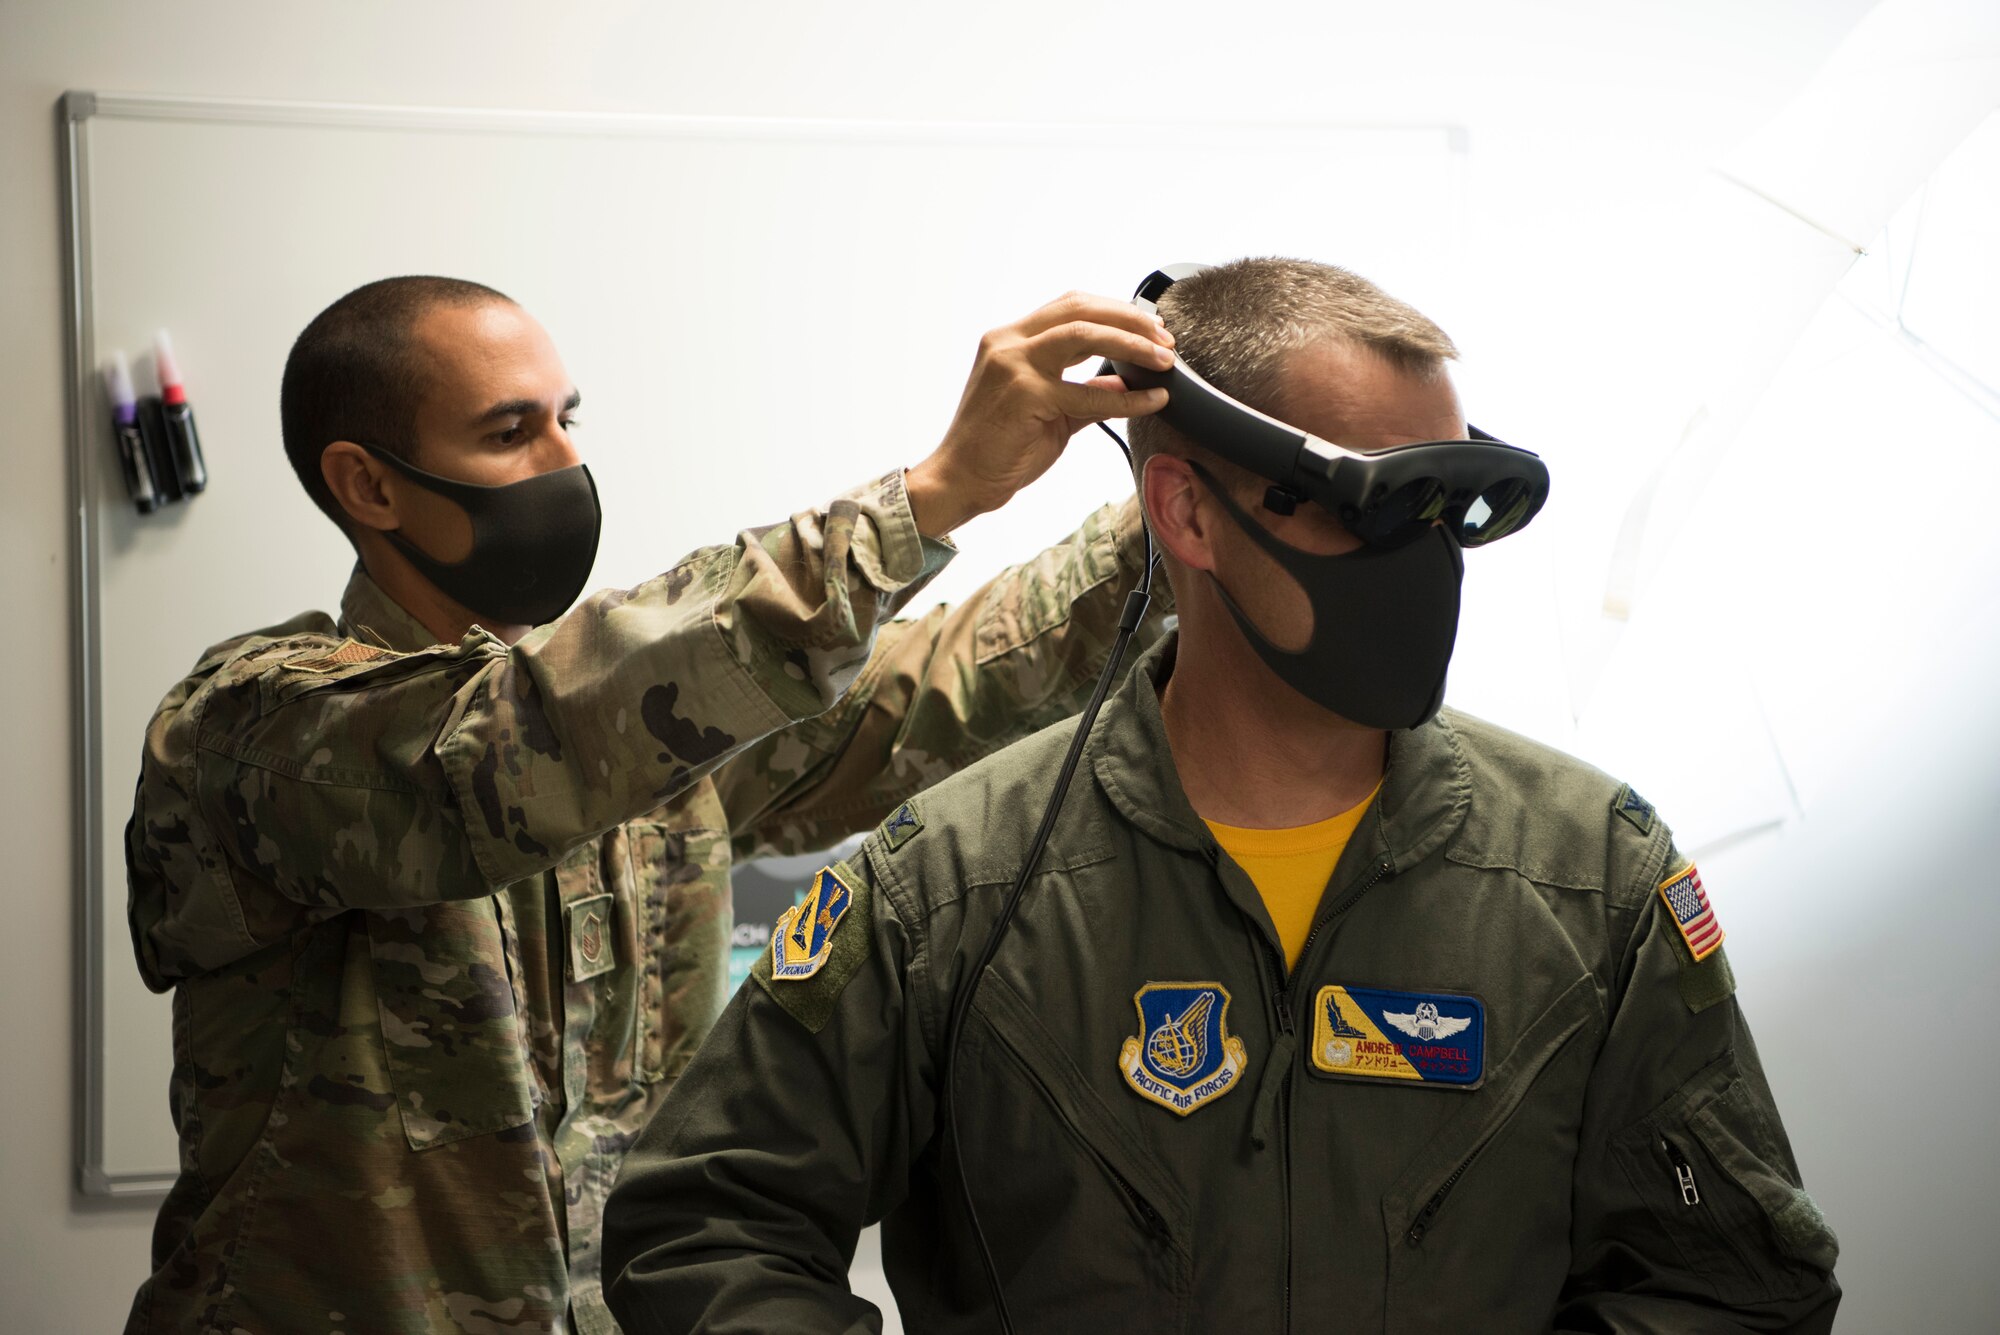 Master Sgt. Kenneth Martin, 753rd Special Operations Aircraft Maintenance Squadron production superintendent puts augmented reality goggles on Col. Andrew Campbell, 374th Airlift Wing commander, in the newly-opened innovation lab at Yokota Air Base, Japan, Sept. 25, 2020. Although newly created and opened, 'The Dojo' is stocked with top-tier technology such as AR, 3D printers, prototyping software, and reverse-engineering tools. (U.S. Air Force photo by Staff Sgt. Taylor A. Workman)